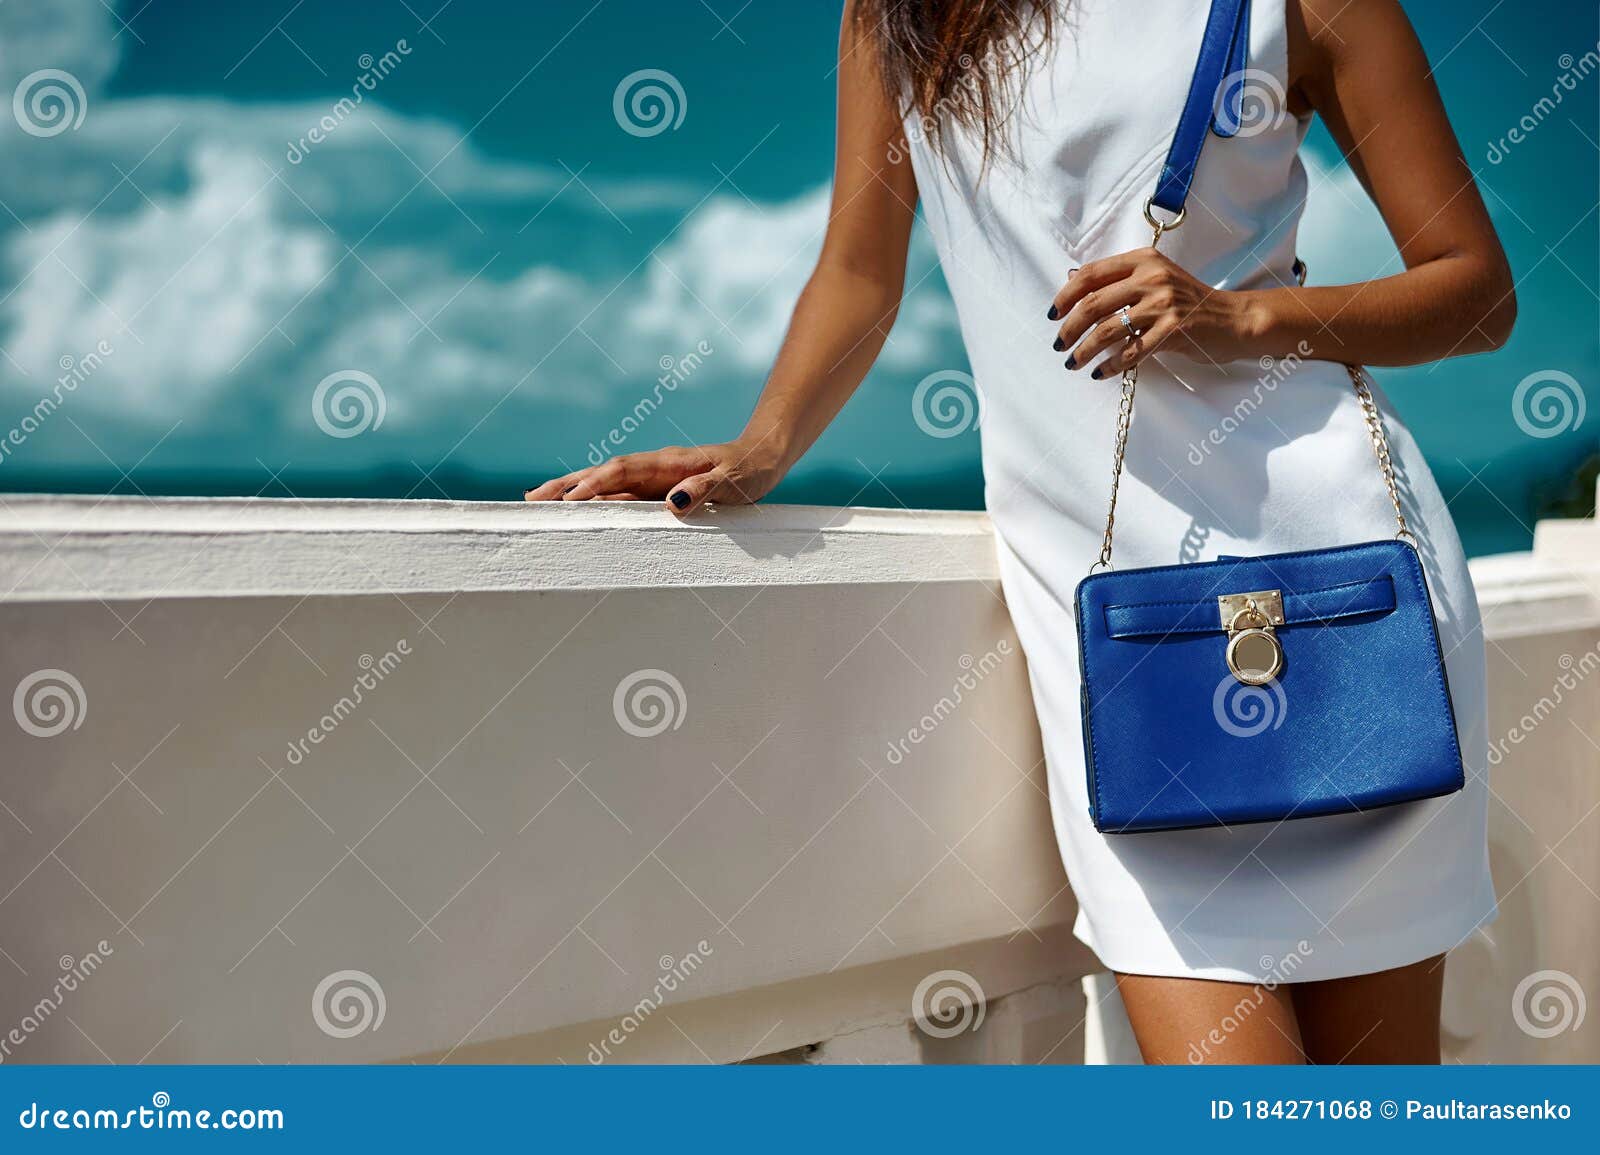 Fashion Luxury Portrait of Chic Woman with Bag Stock Photo - Image of ...